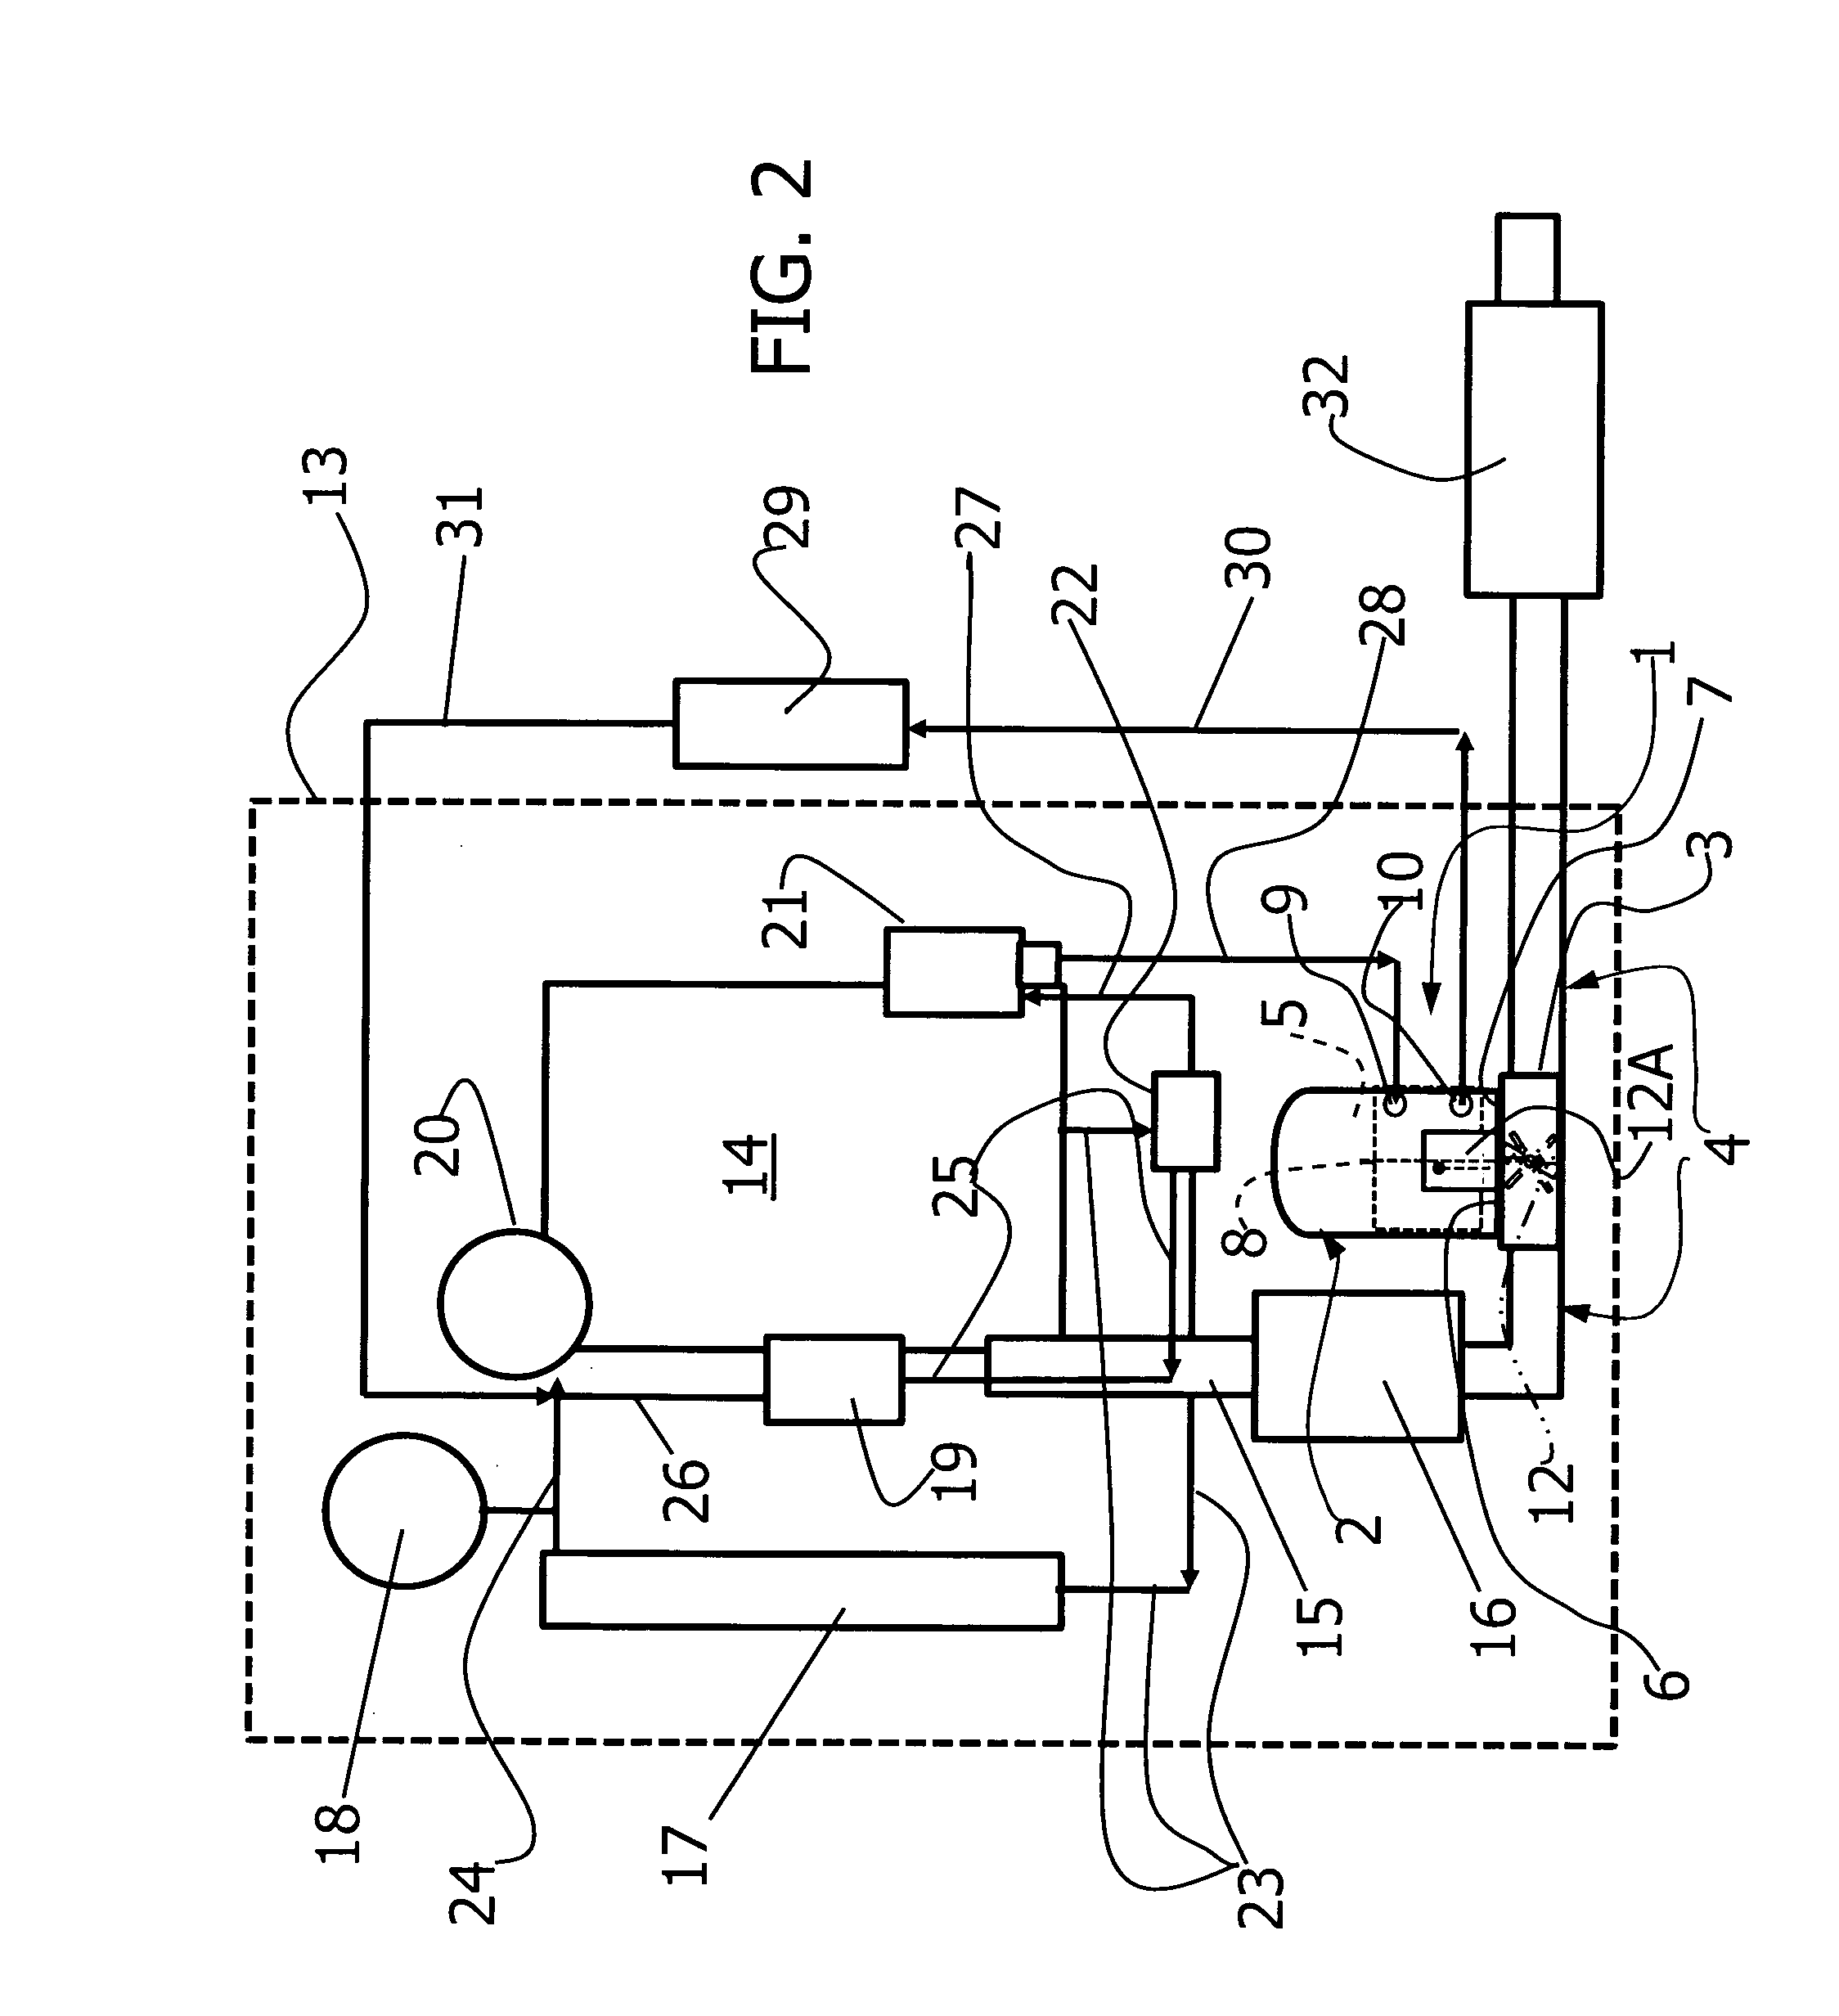 Unit for recovering and converting the thermal energy of the exhaust gases of an internal combustion engine of a vehicle